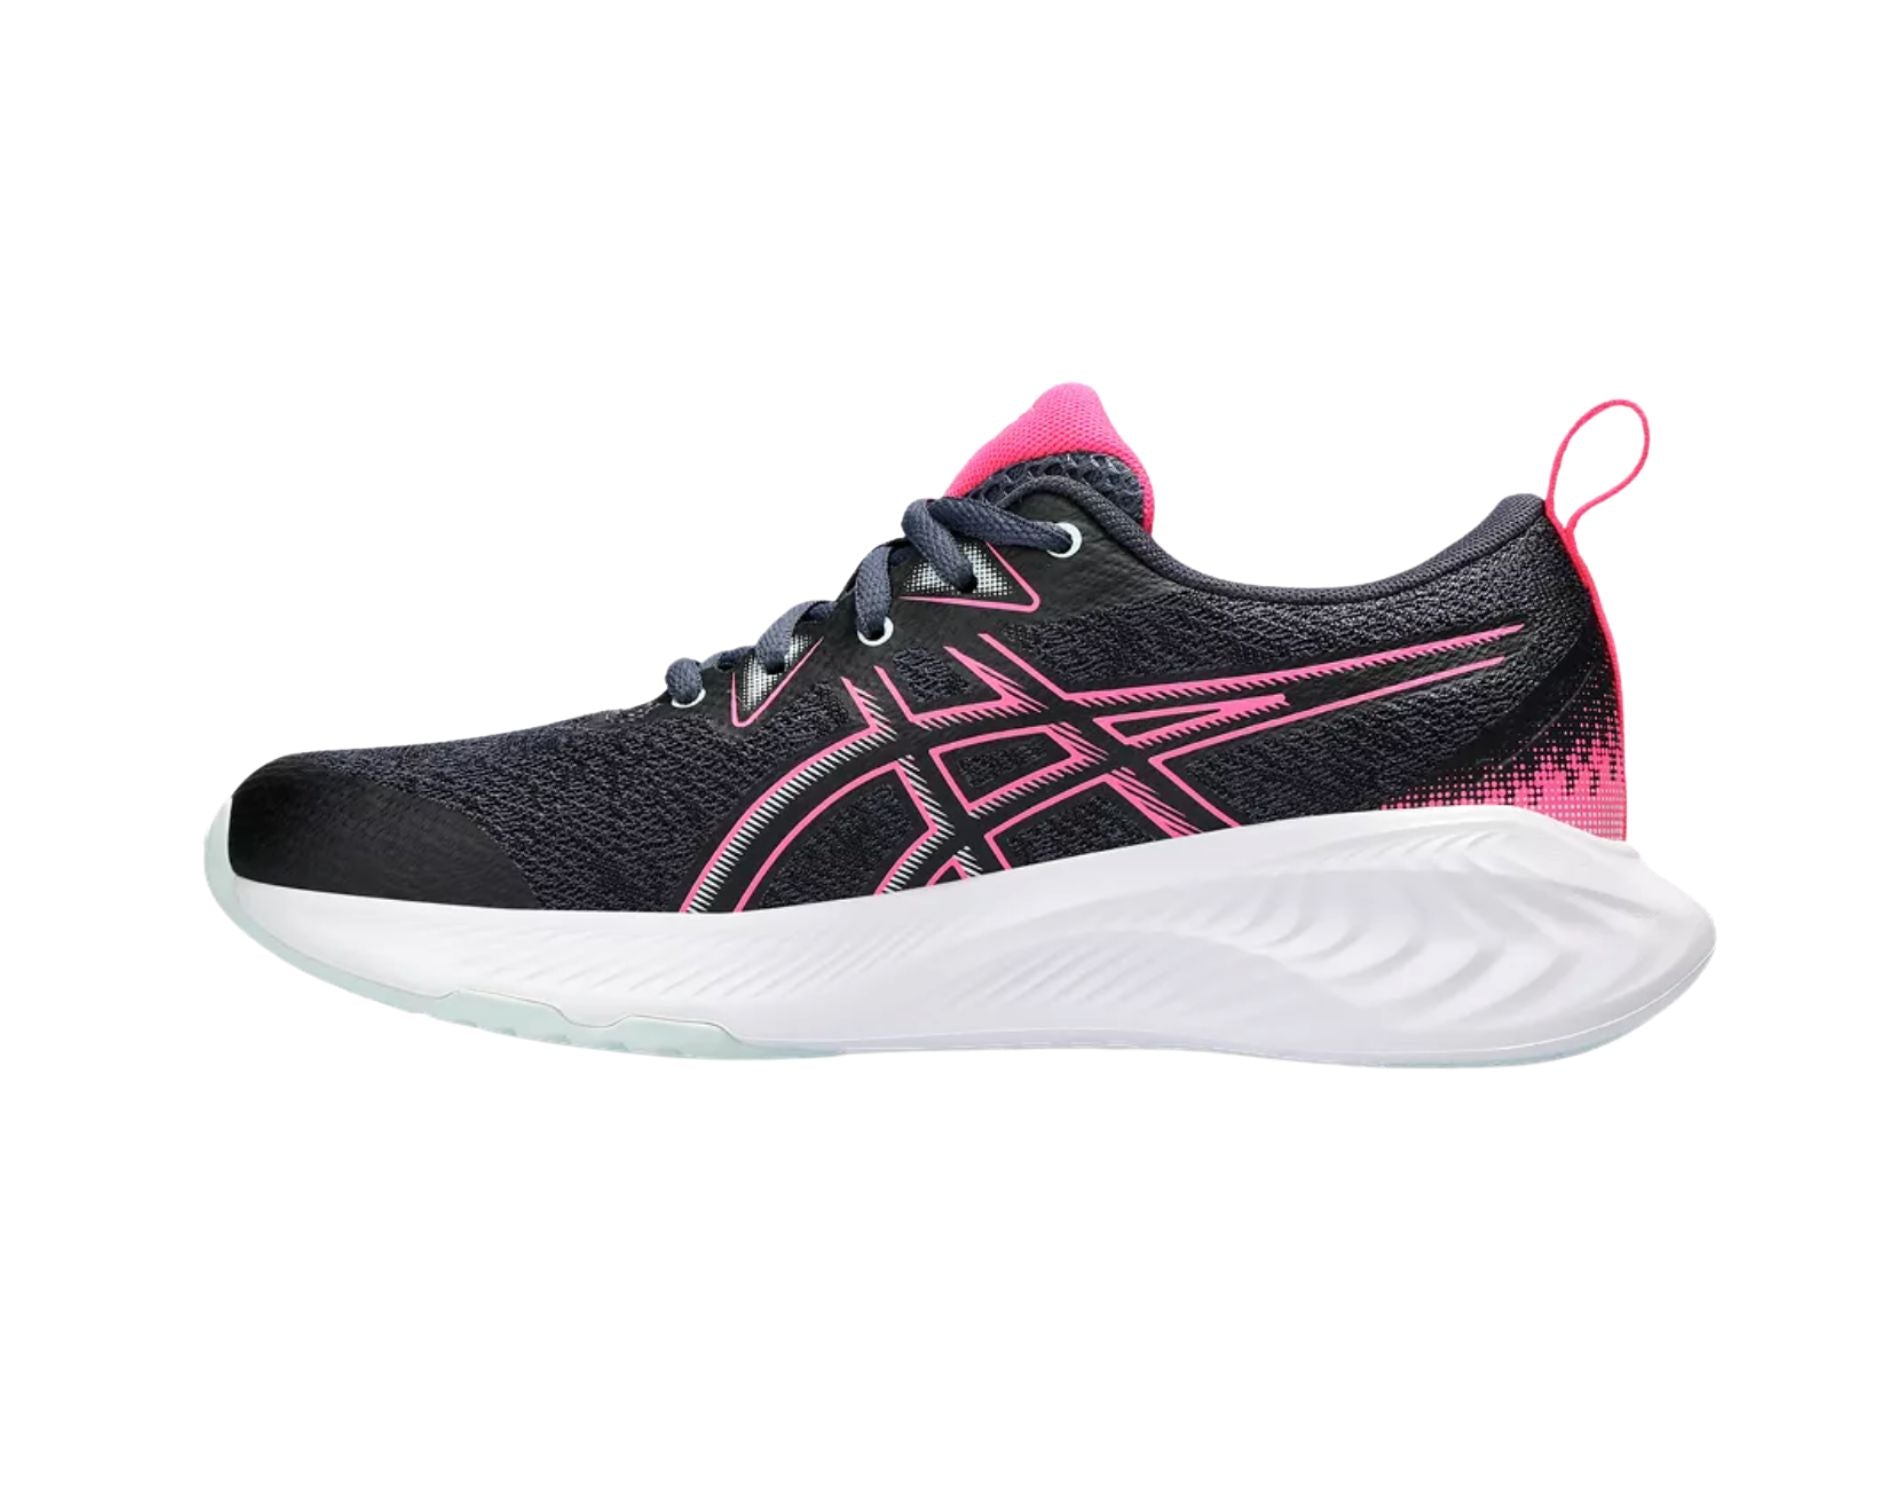 Asics Cumulus 25 GS girls sports shoes in tarmac hot pink colour